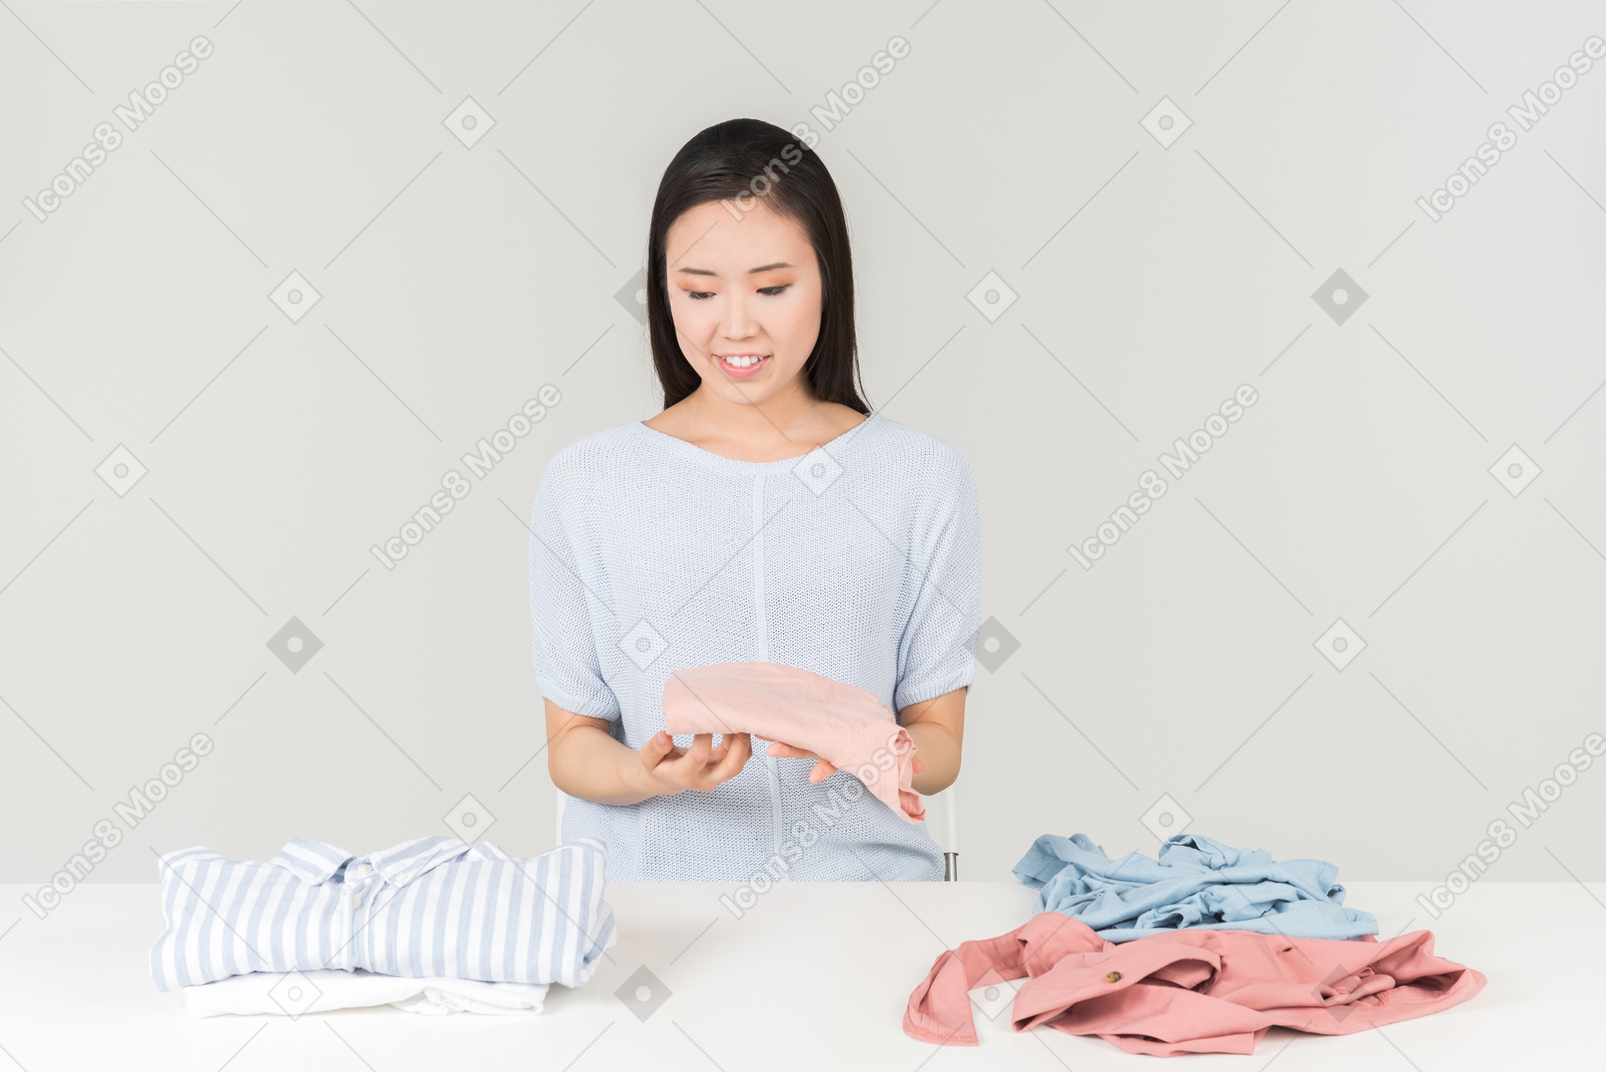 That moment when you want to organize your clothes by colour but get stuck for half an hour instead staring at the striped shirt and trying to decide which pile it fits